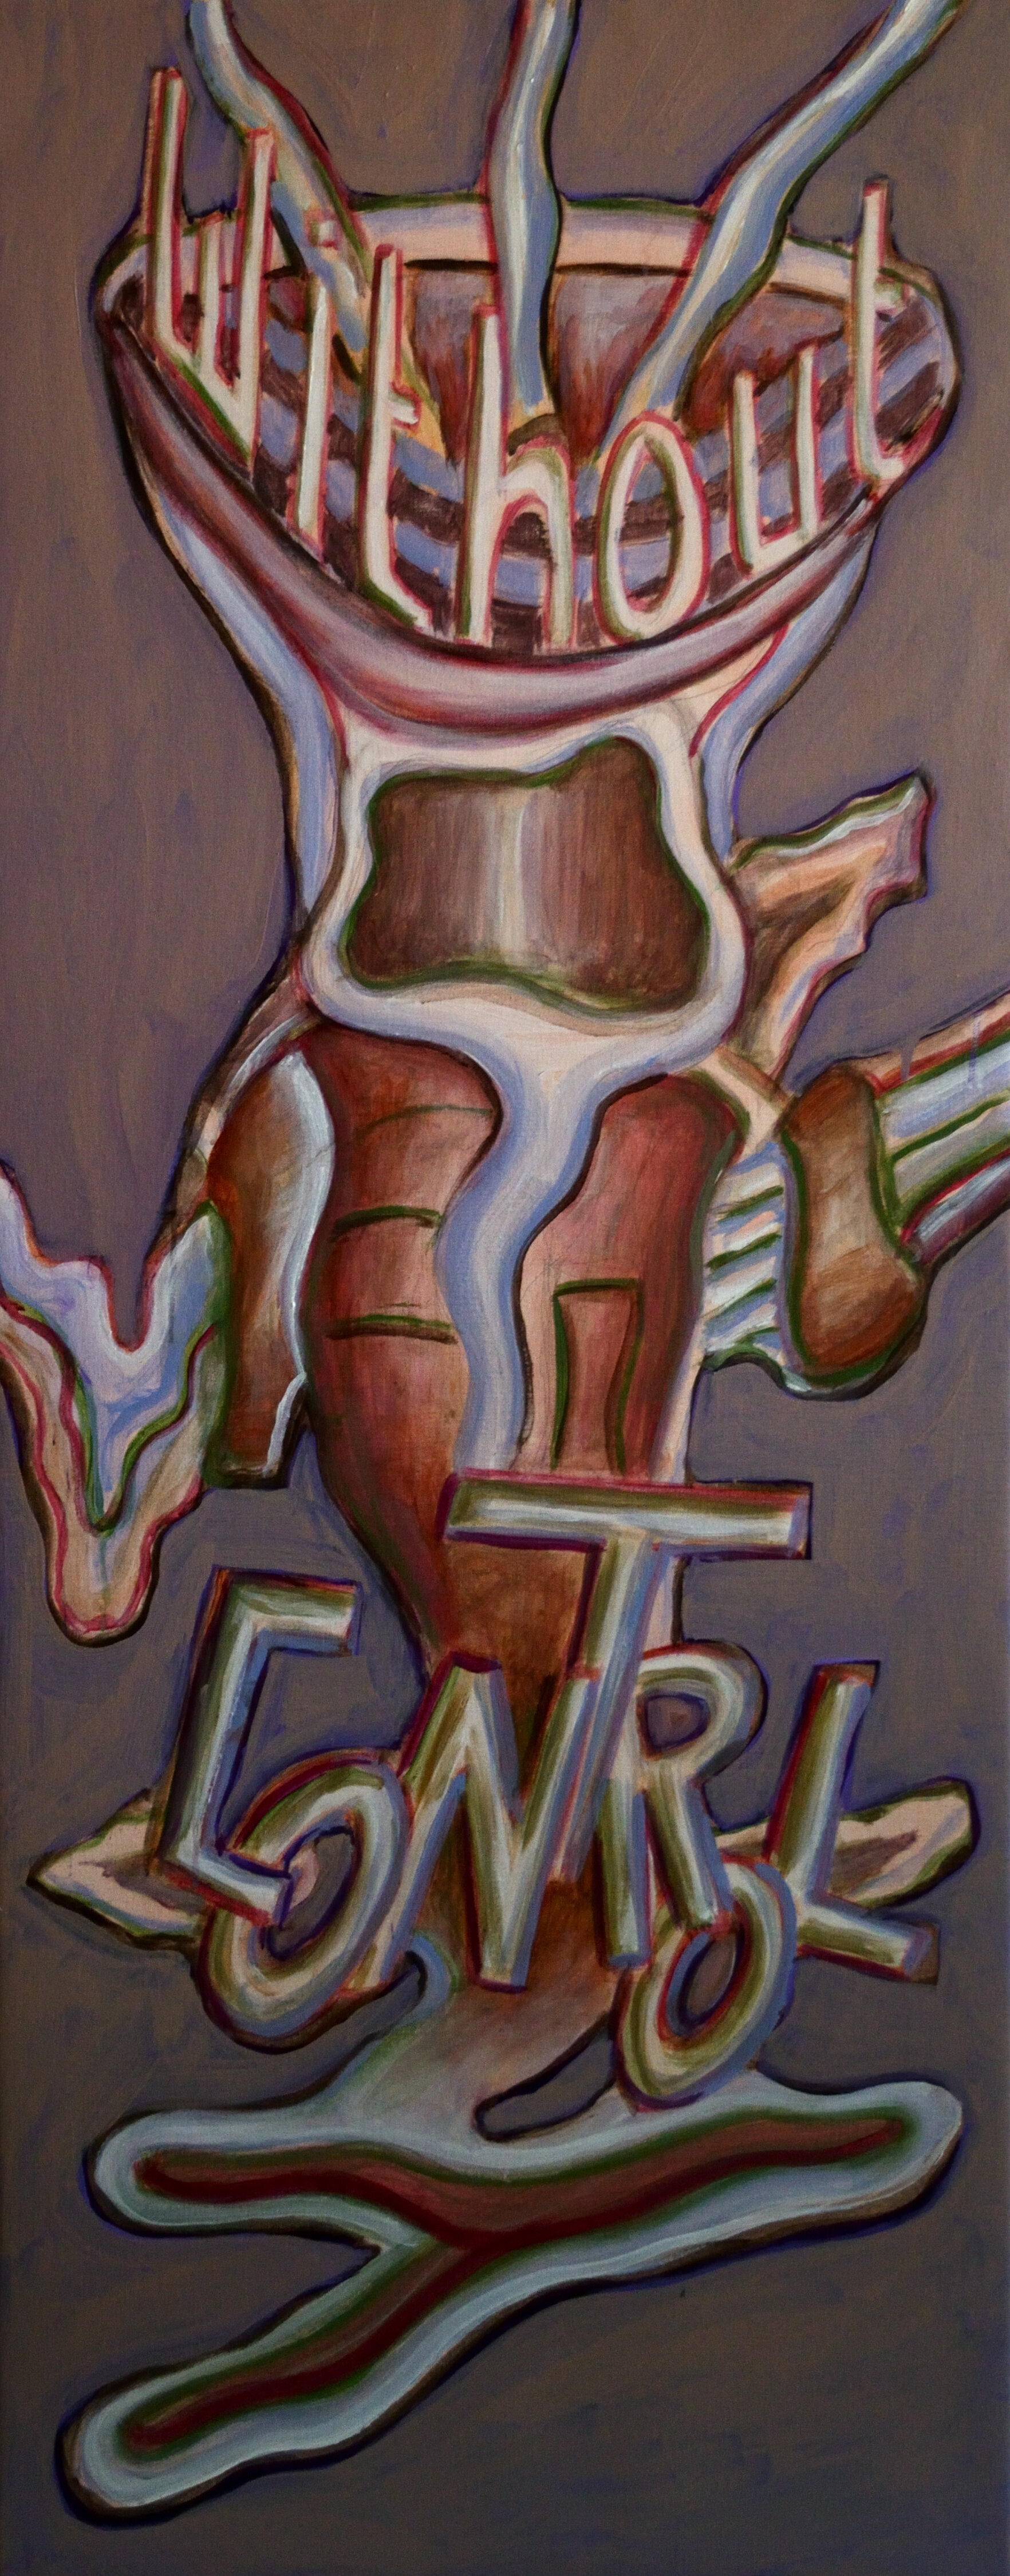 Without Control, acrylic on canvas, 150x60cm